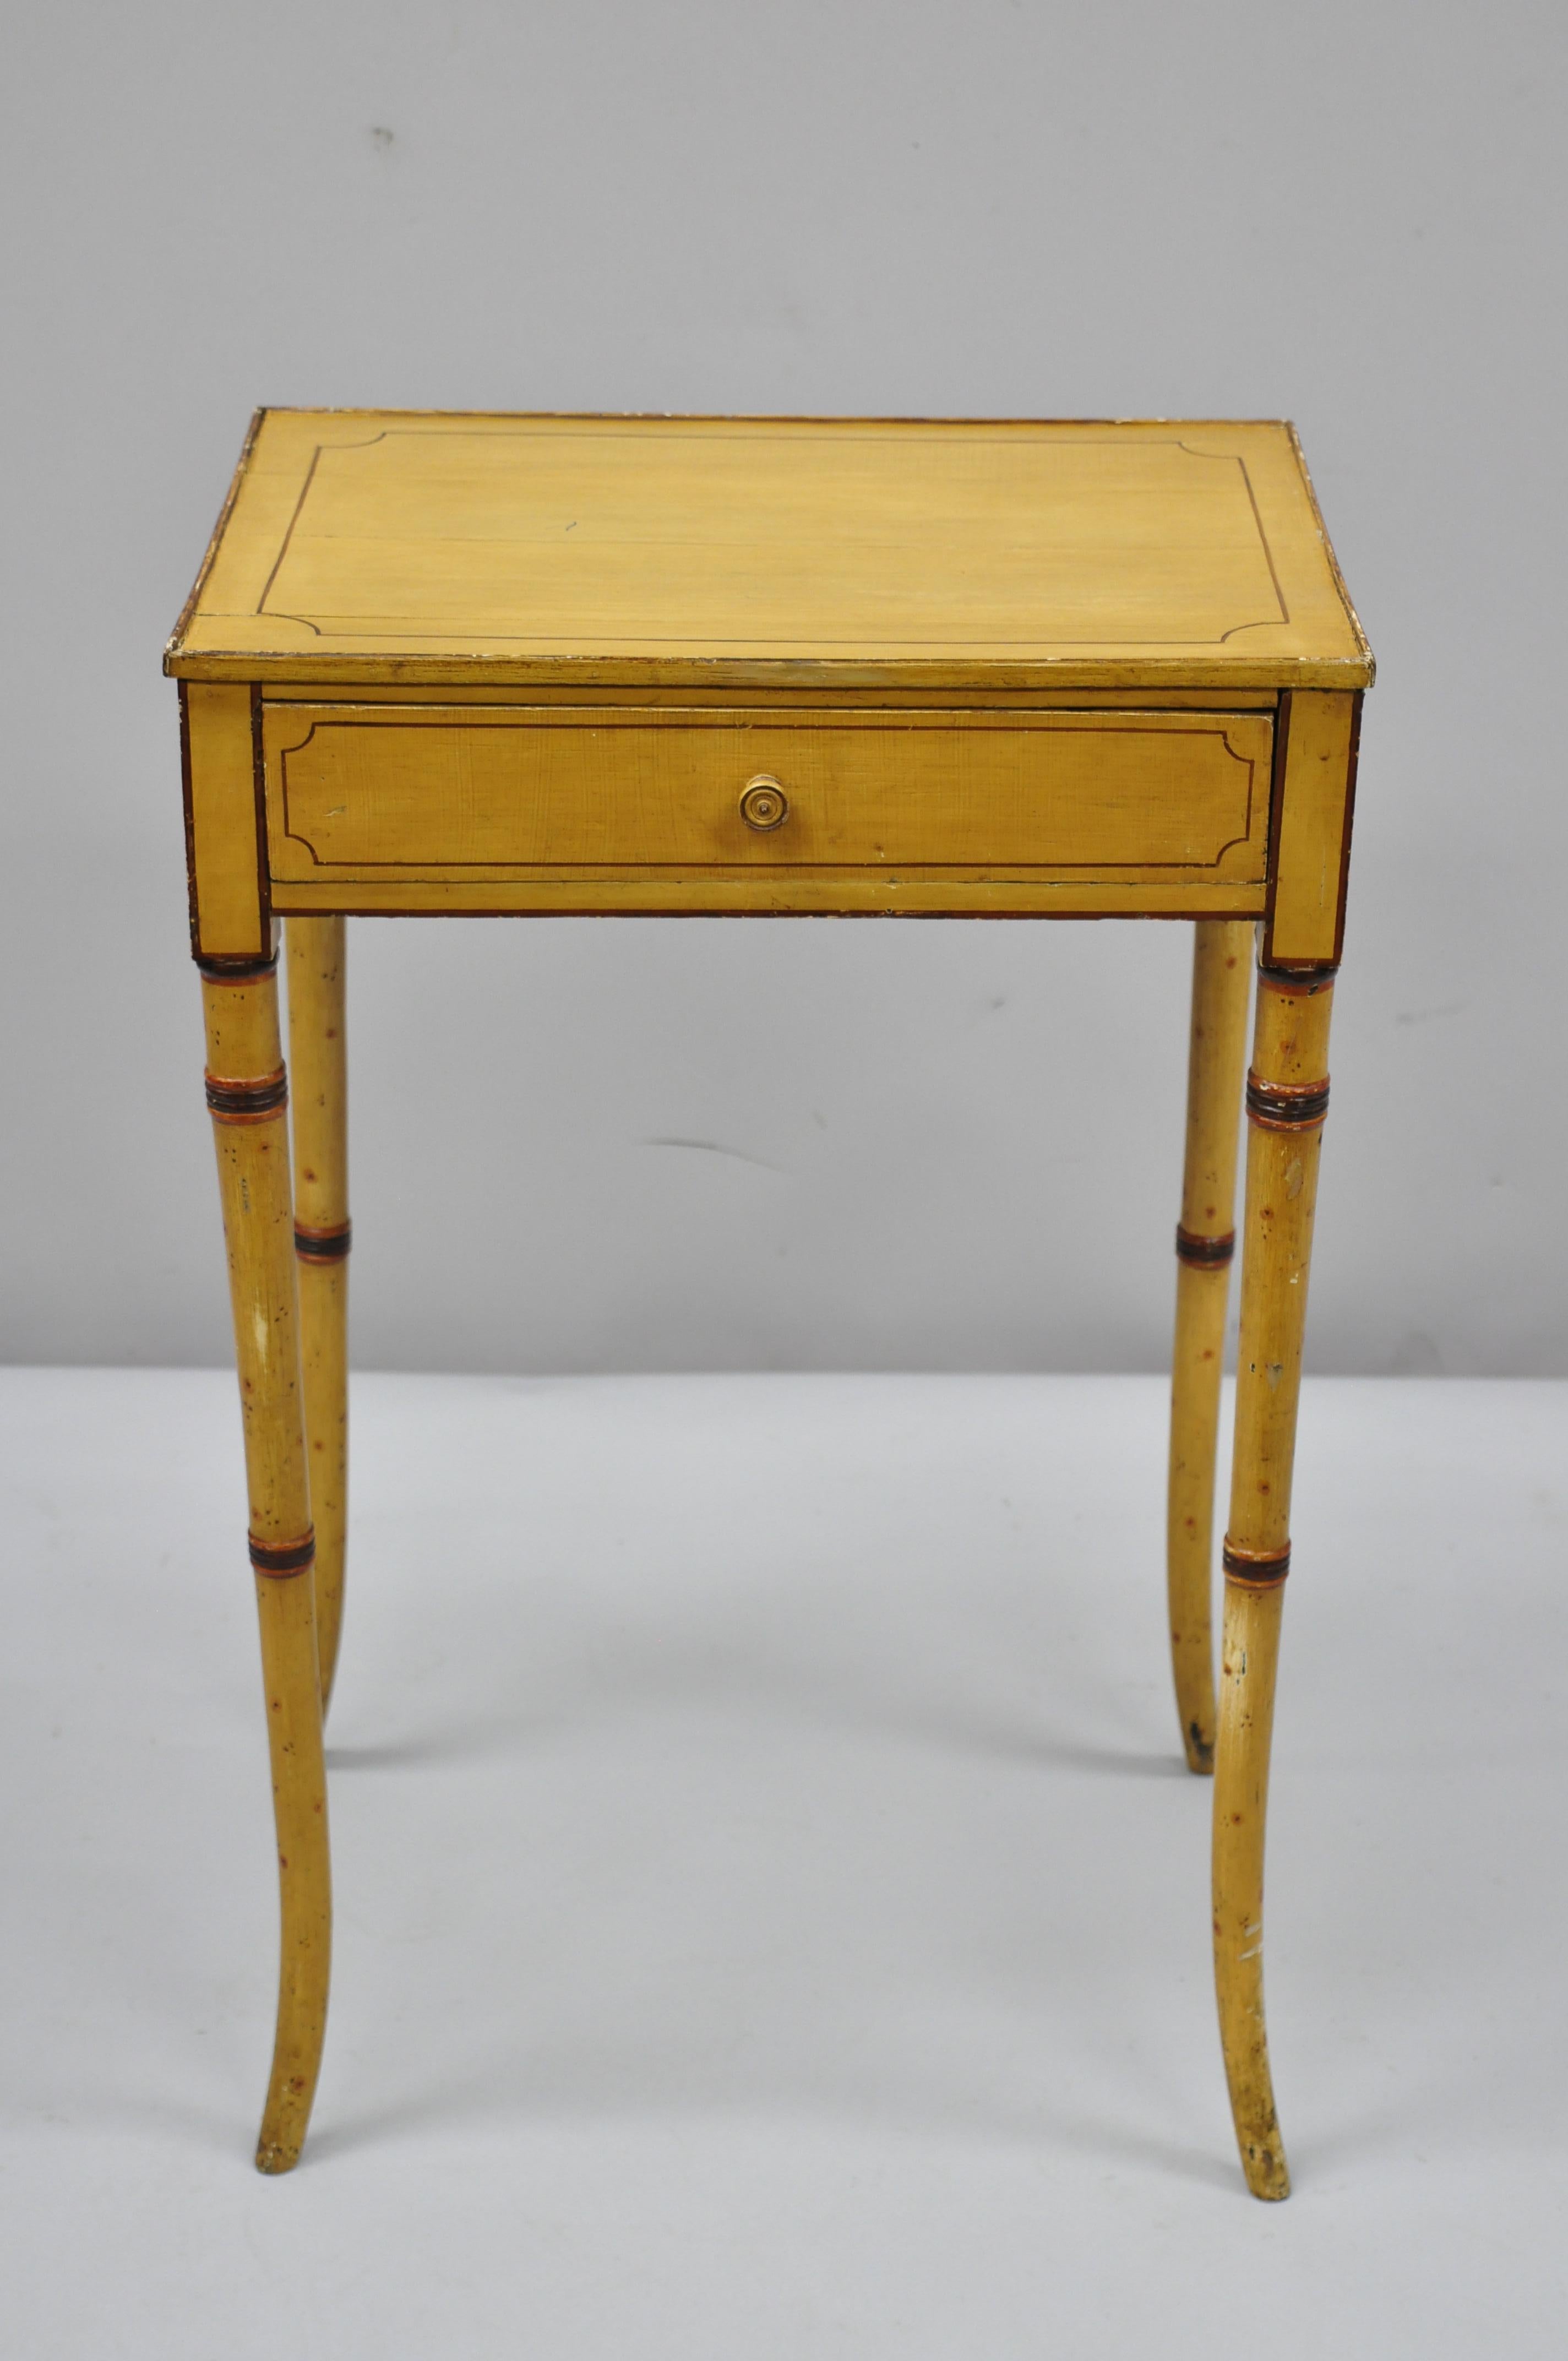 19th century yellow English Victorian faux bamboo one drawer side table nightstand. Item features yellow paint decorated on all sides, solid wood construction, finished back, 1 dovetail drawer, tall tapered legs, very nice antique item, circa early